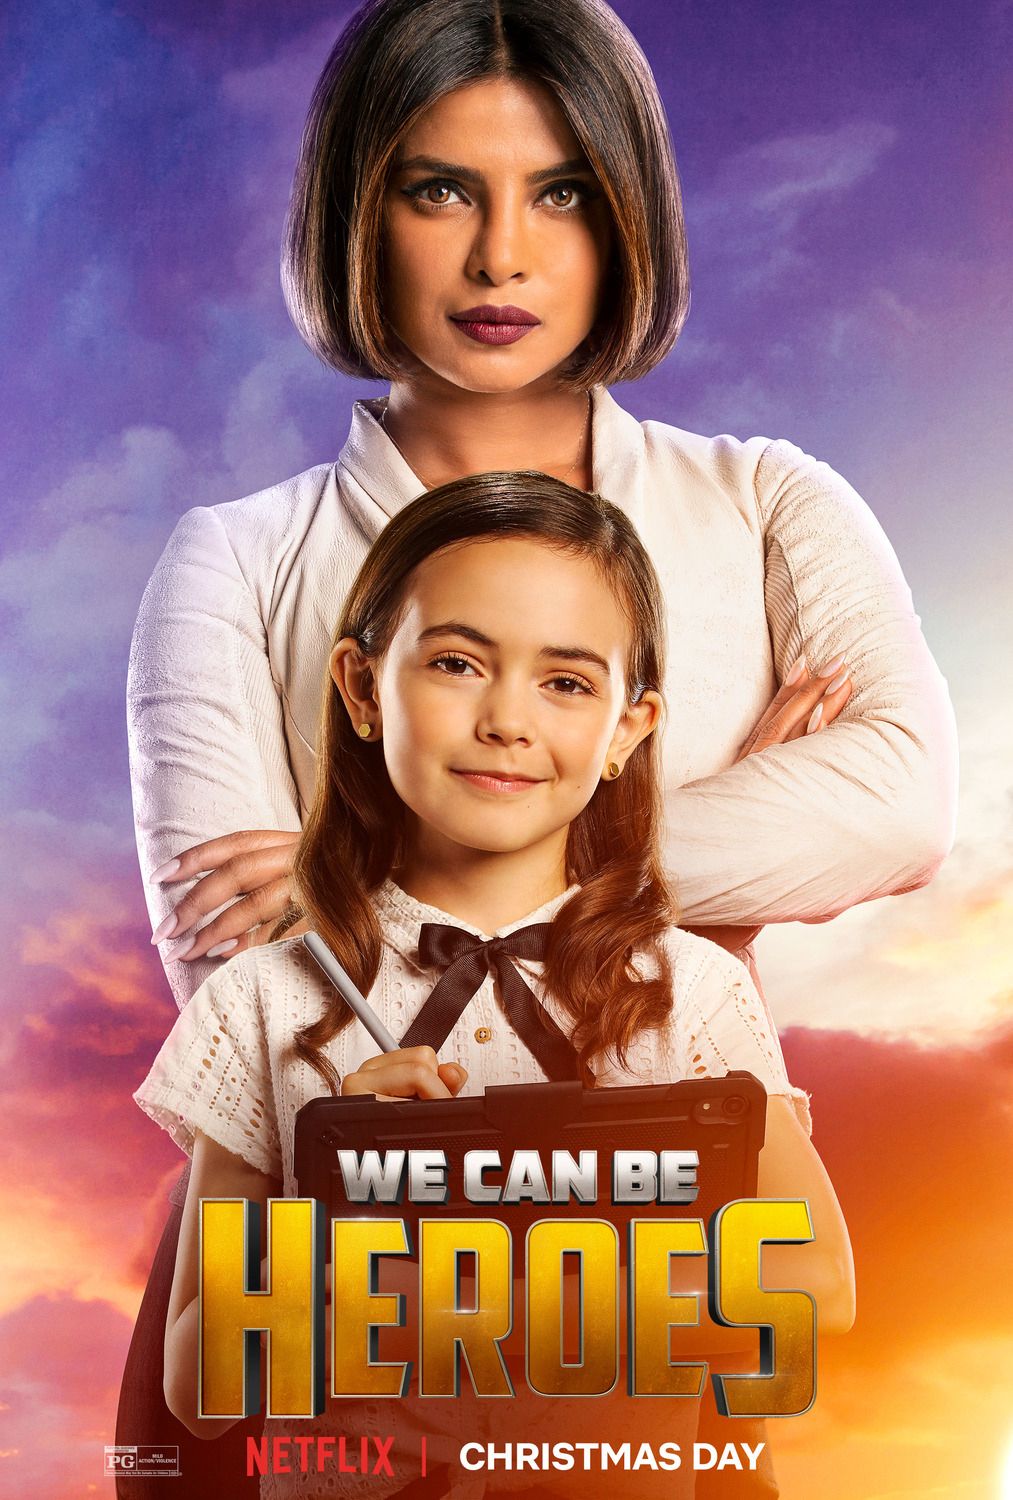 We Can Be Heroes Character Poster #4